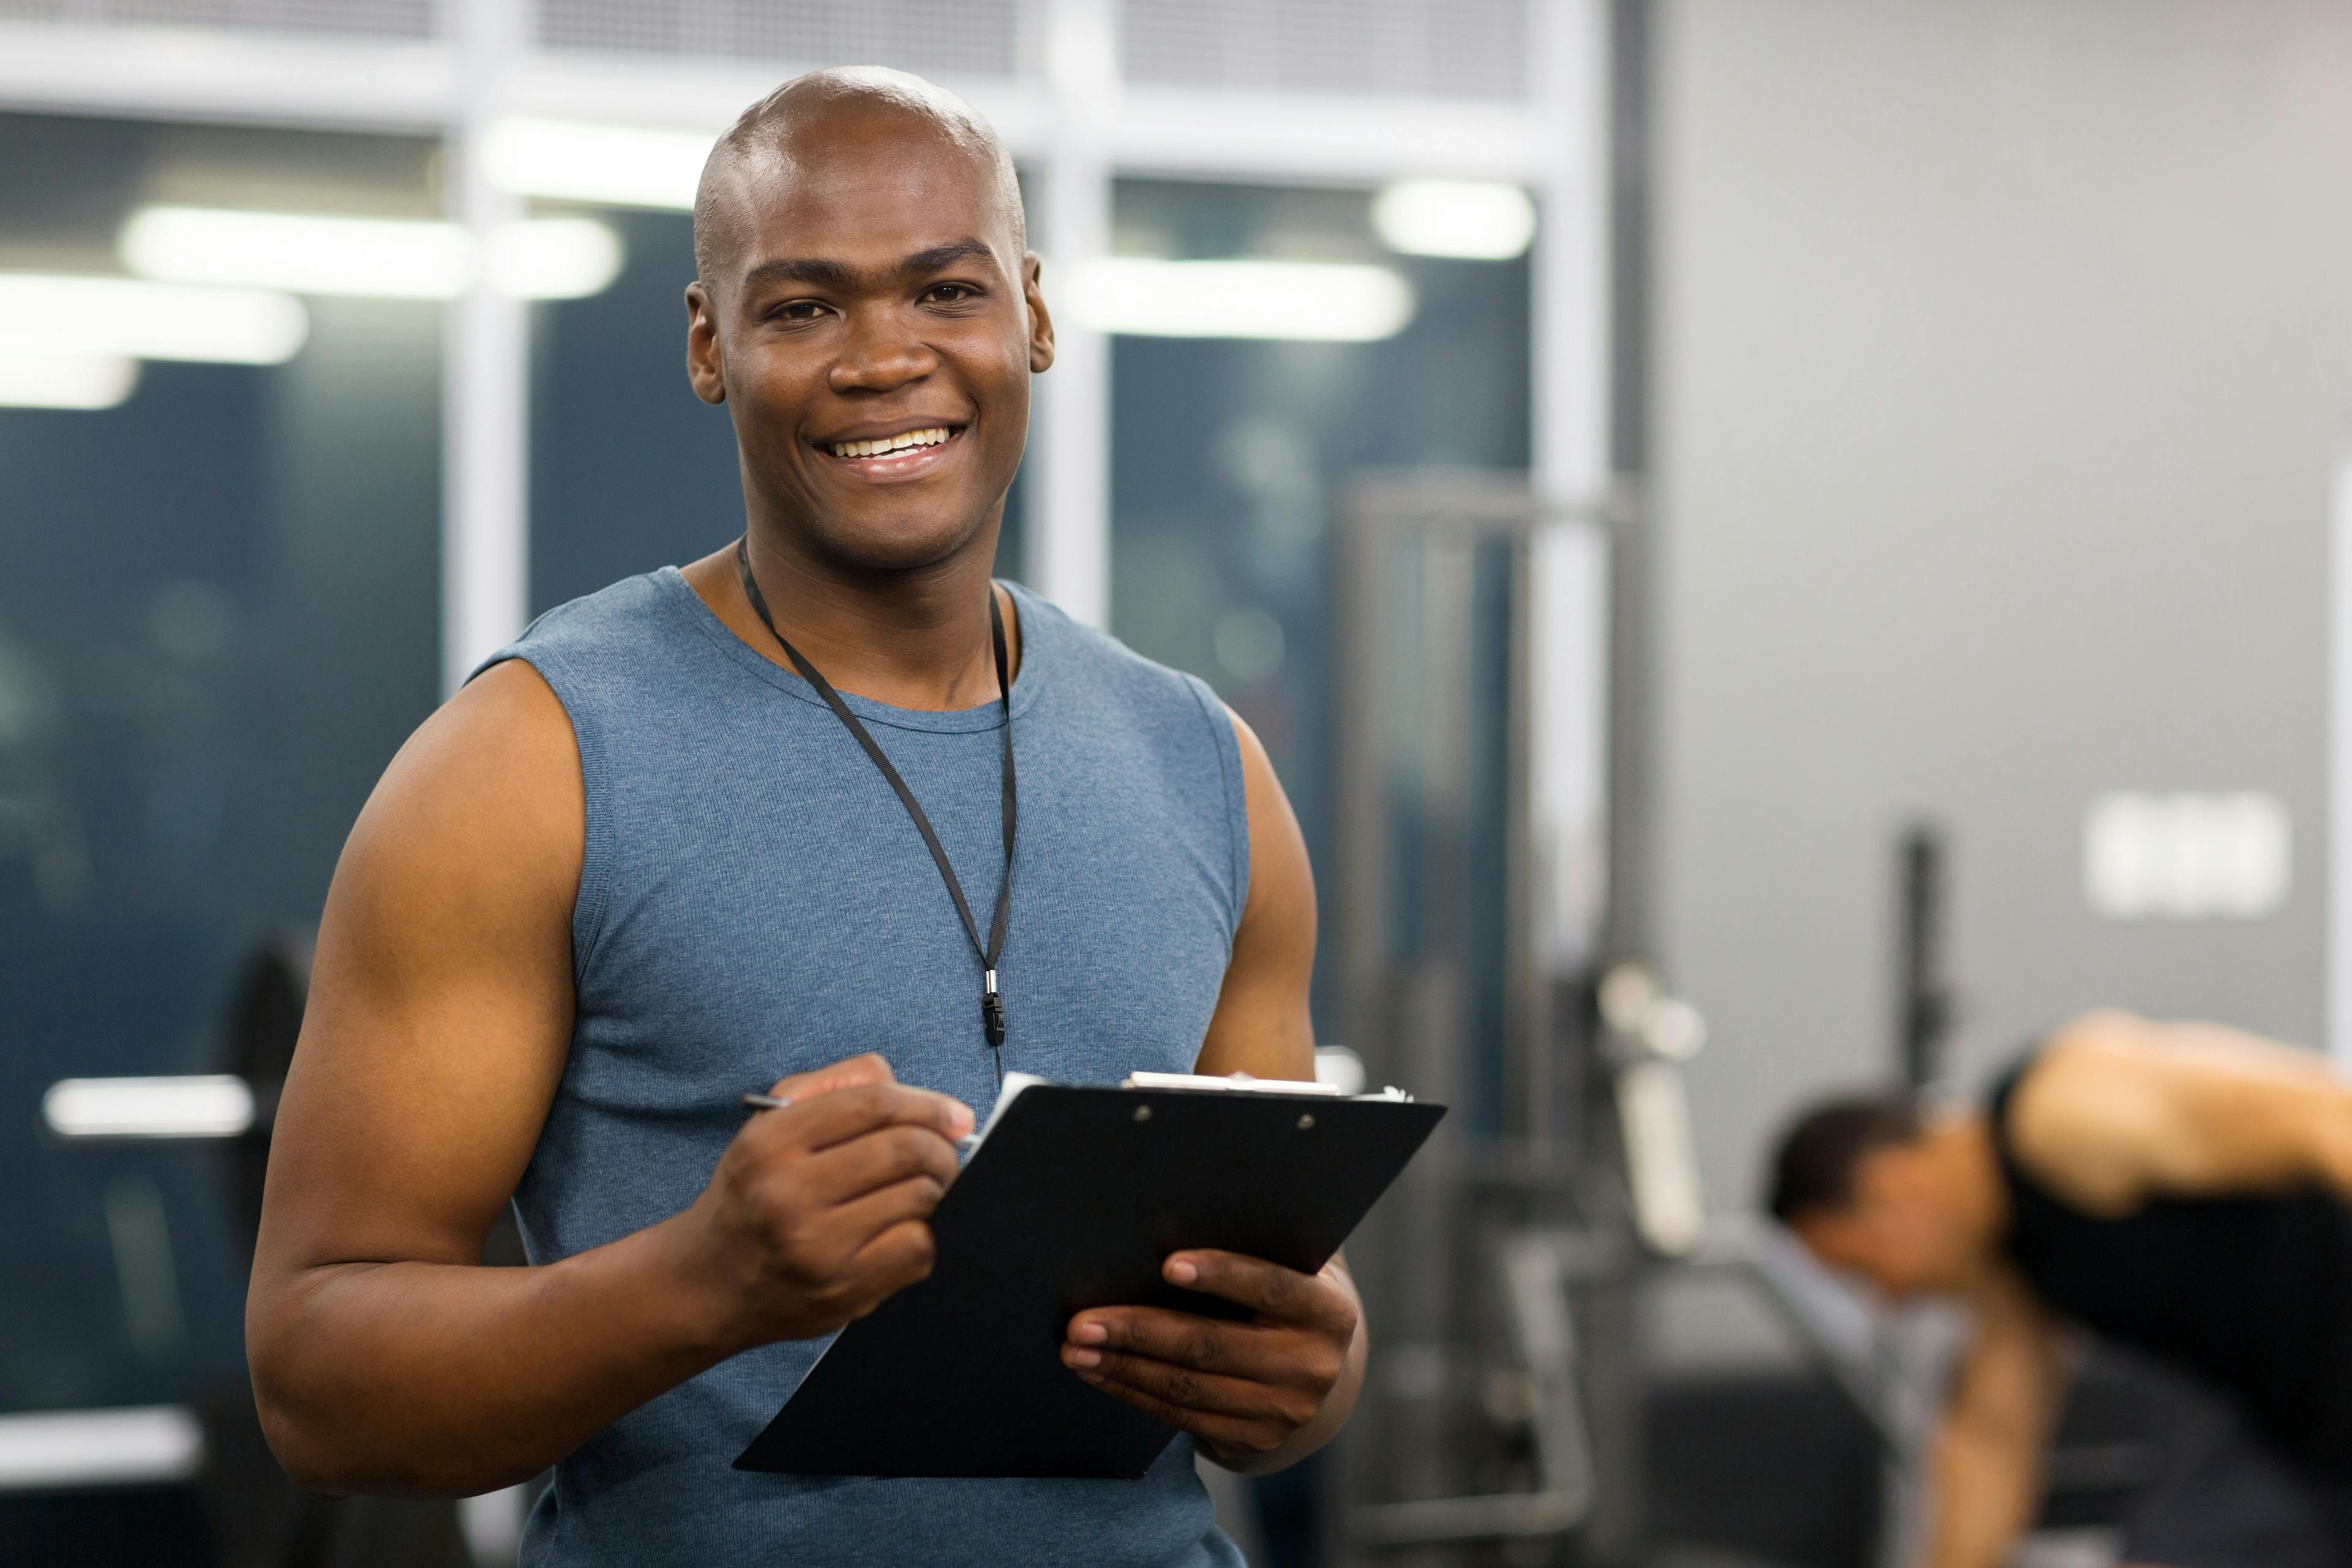 The best gym management software